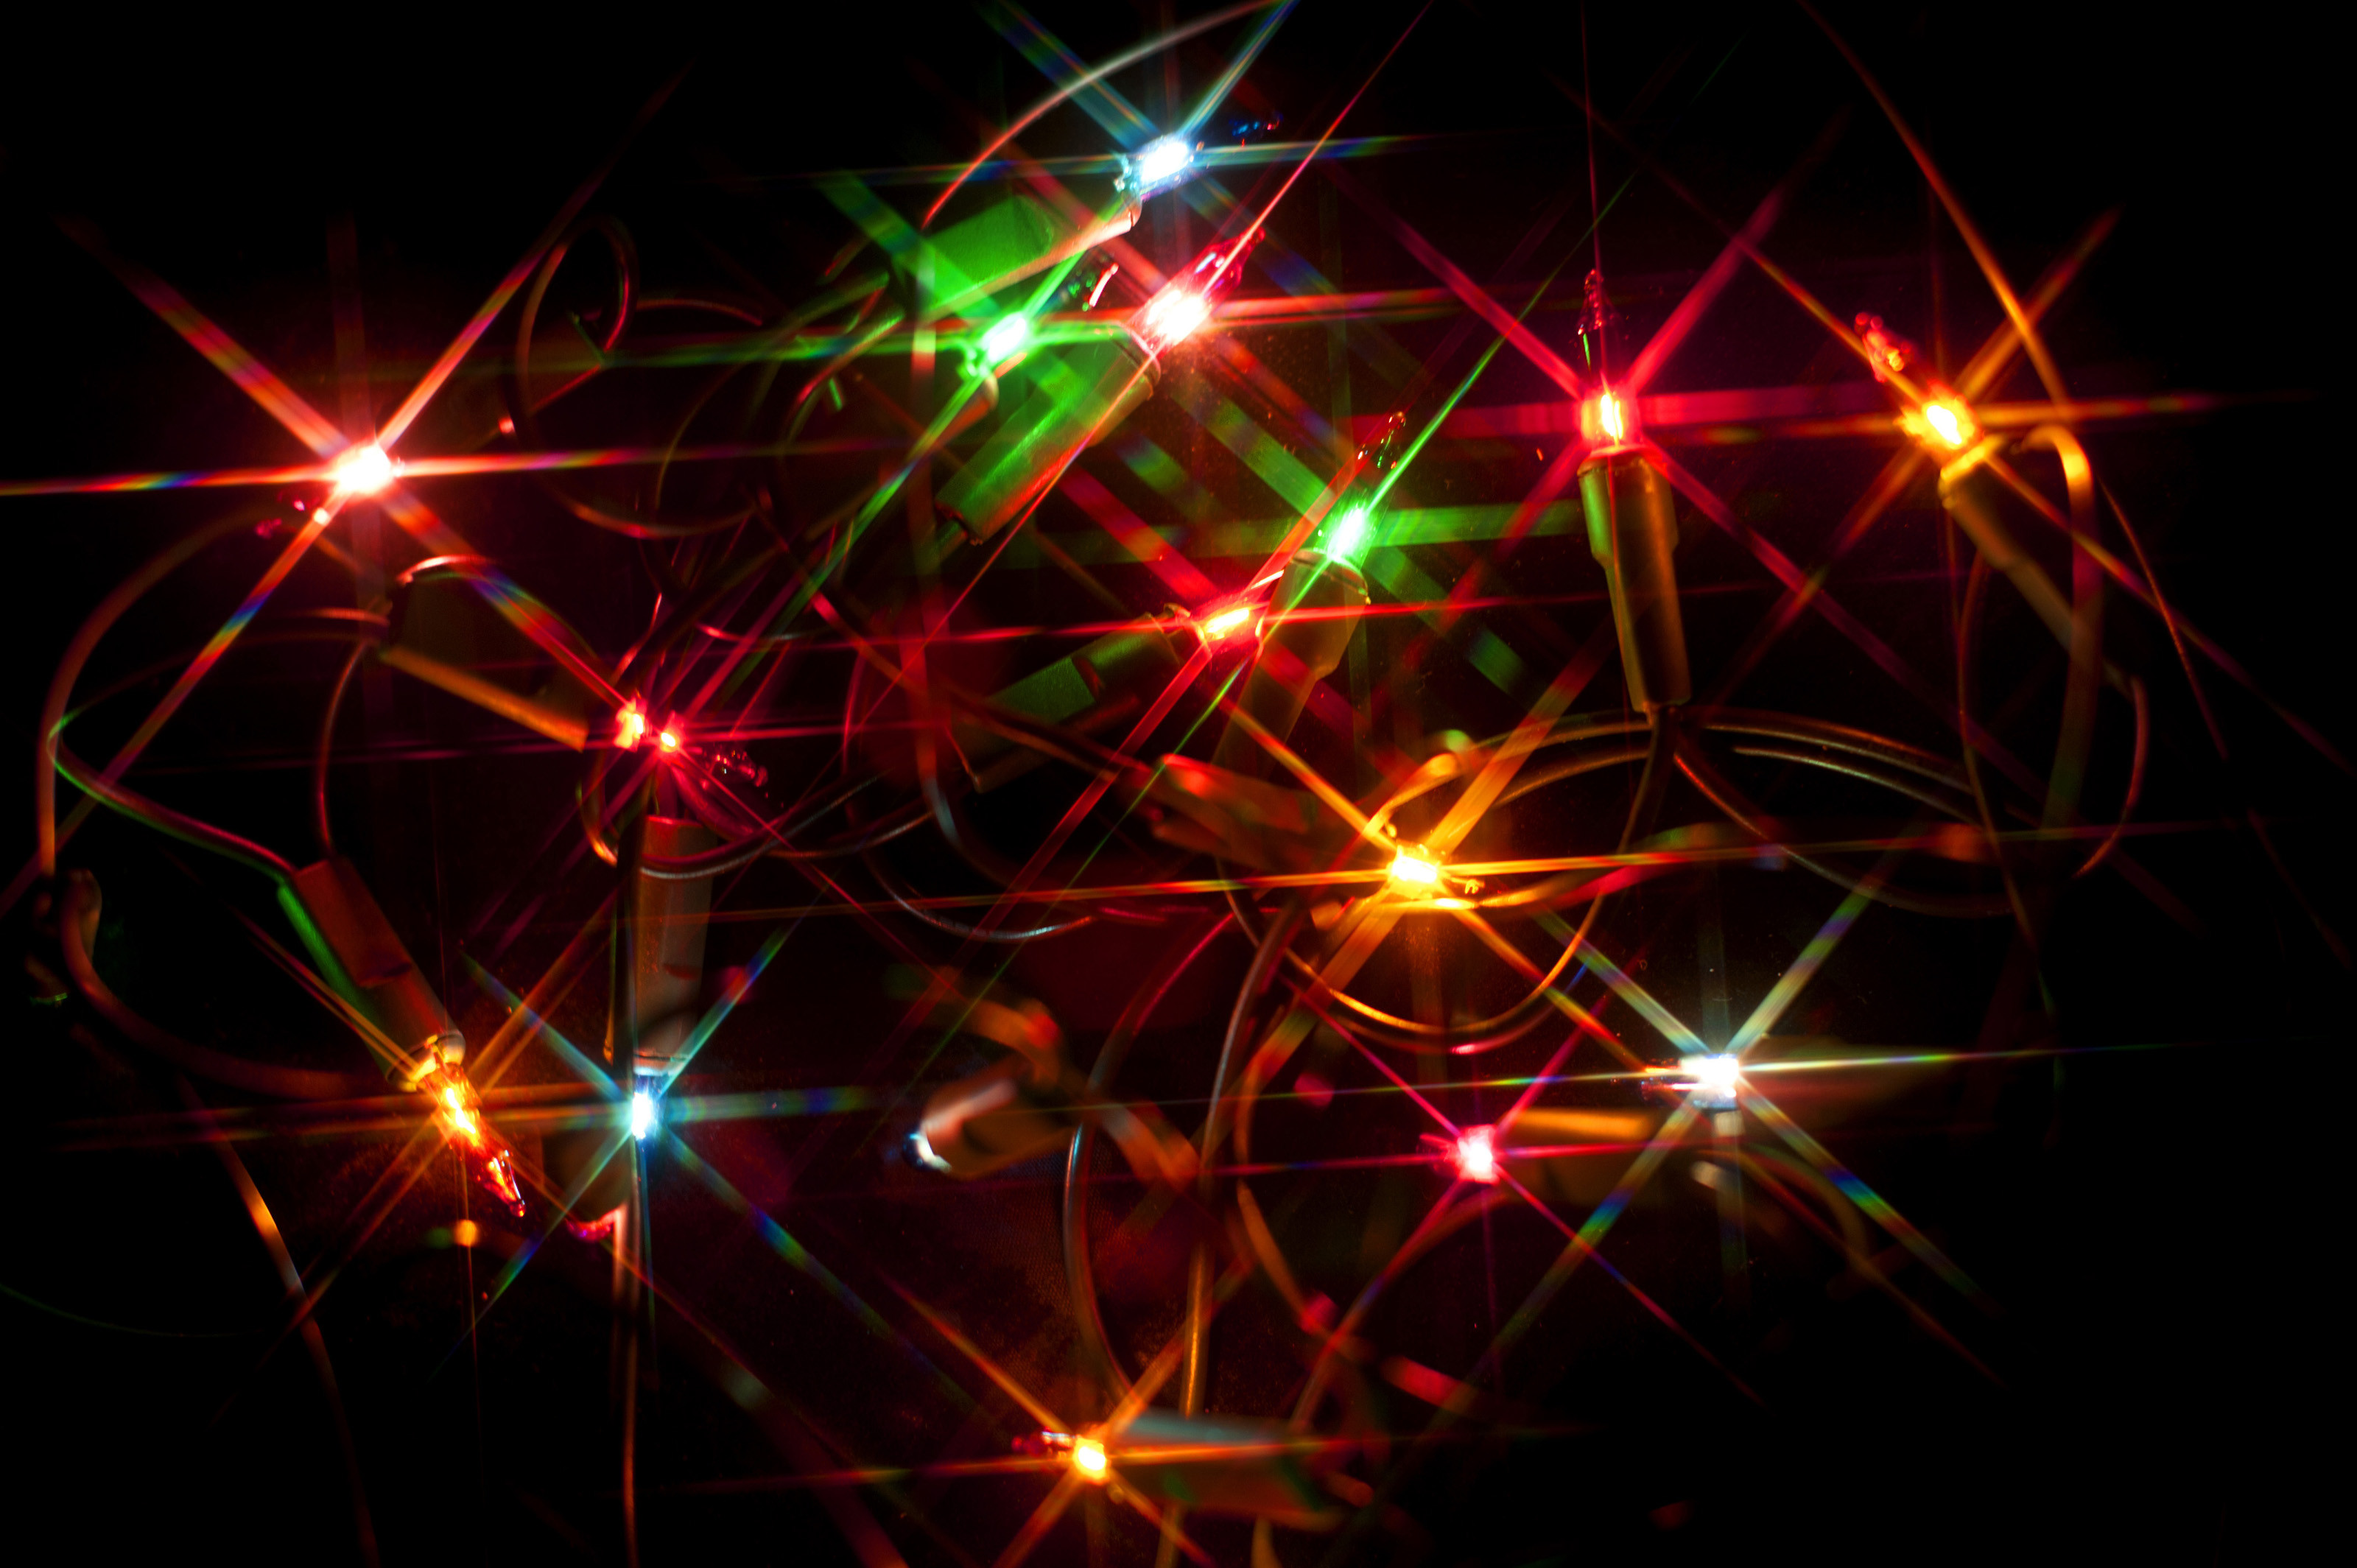 3200x2129 Free Stock Photo 8639 Colourful Christmas lights background